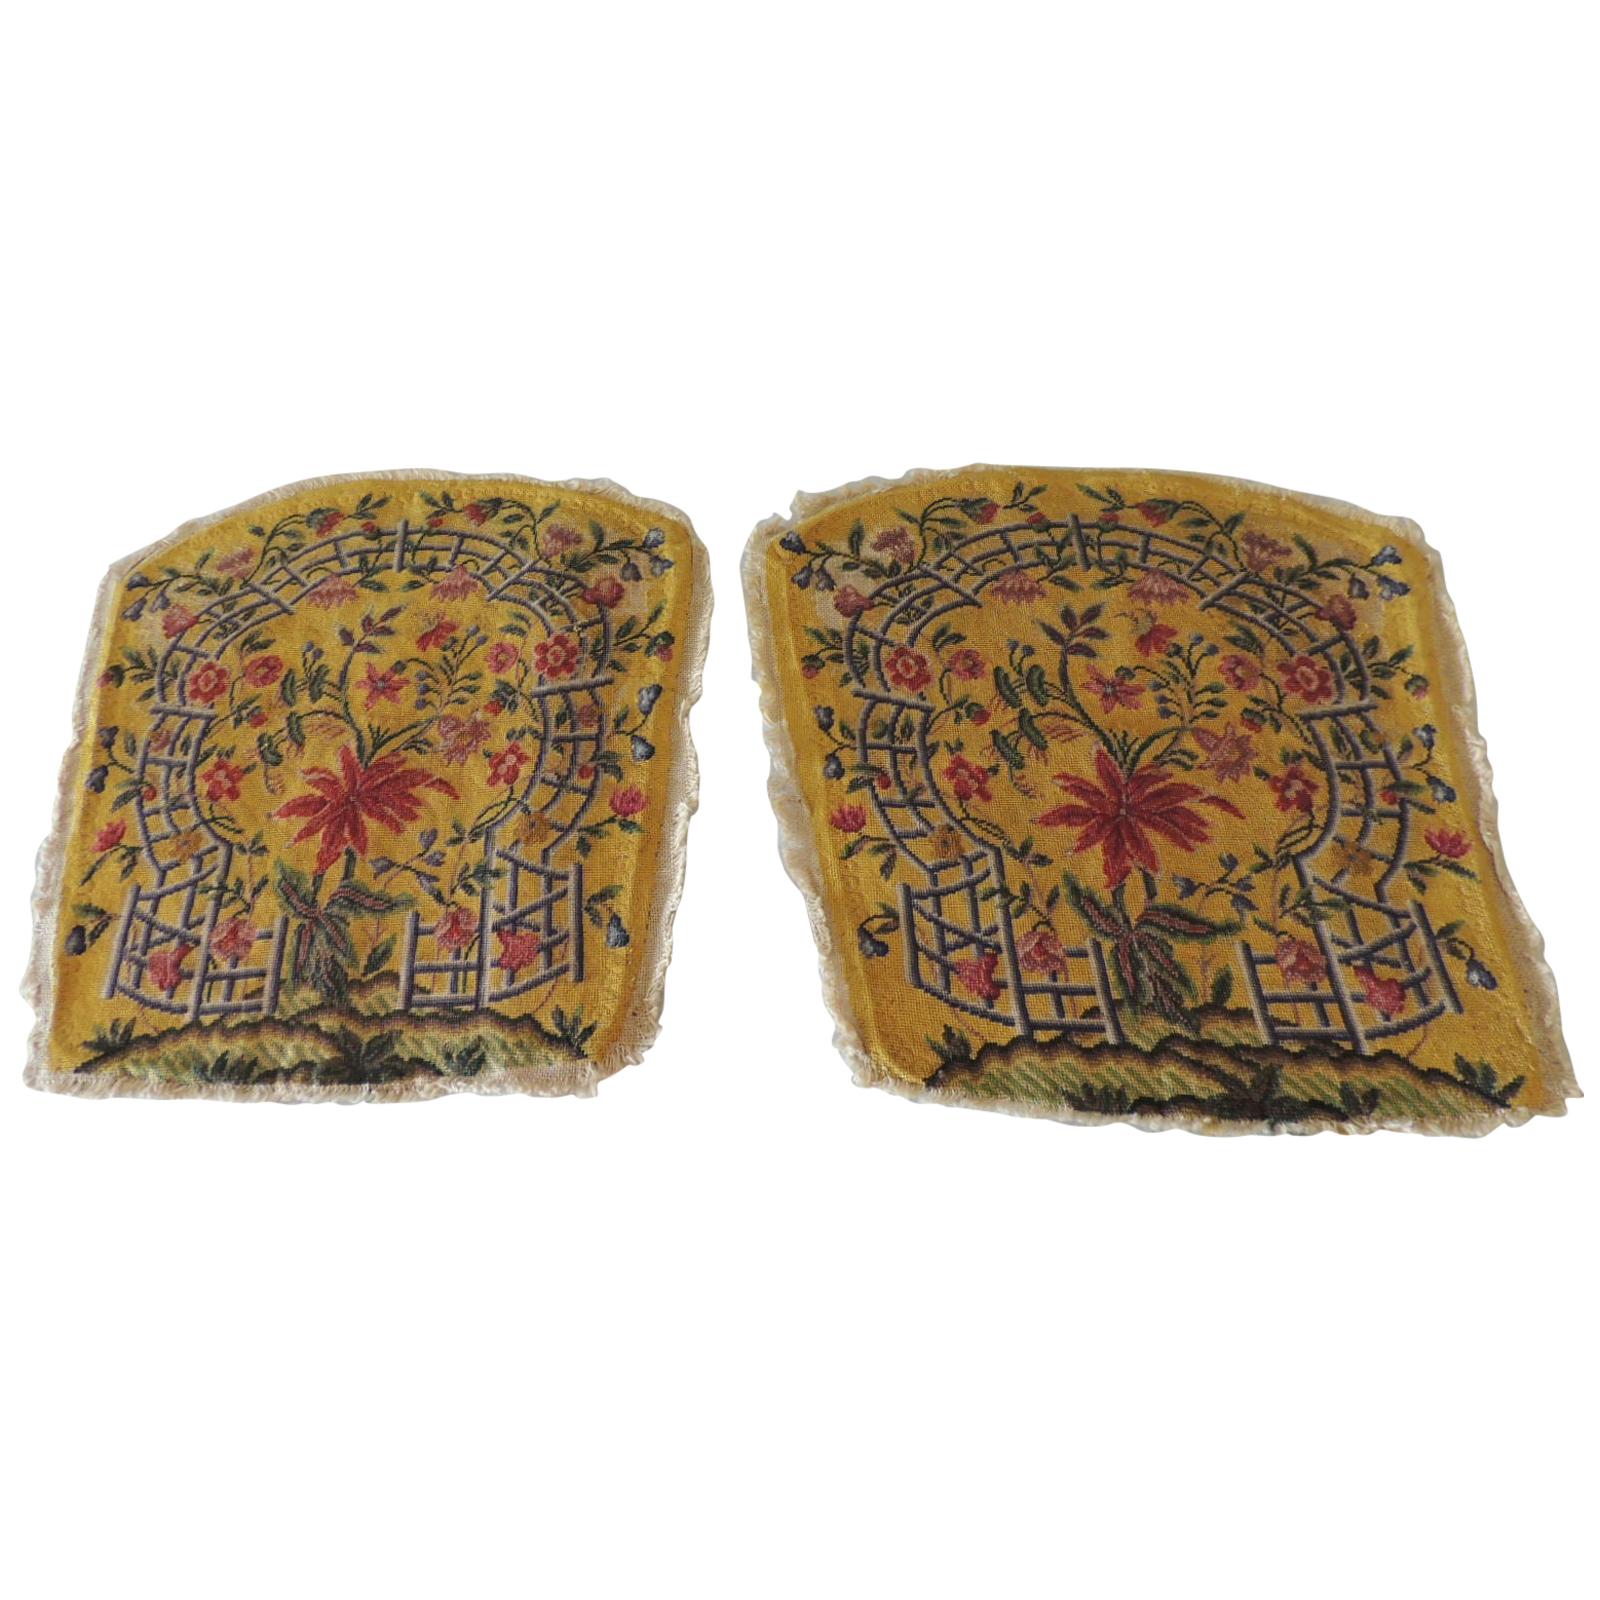 Pair of Antique Yellow and Green Petit Point Tapestry Fragments